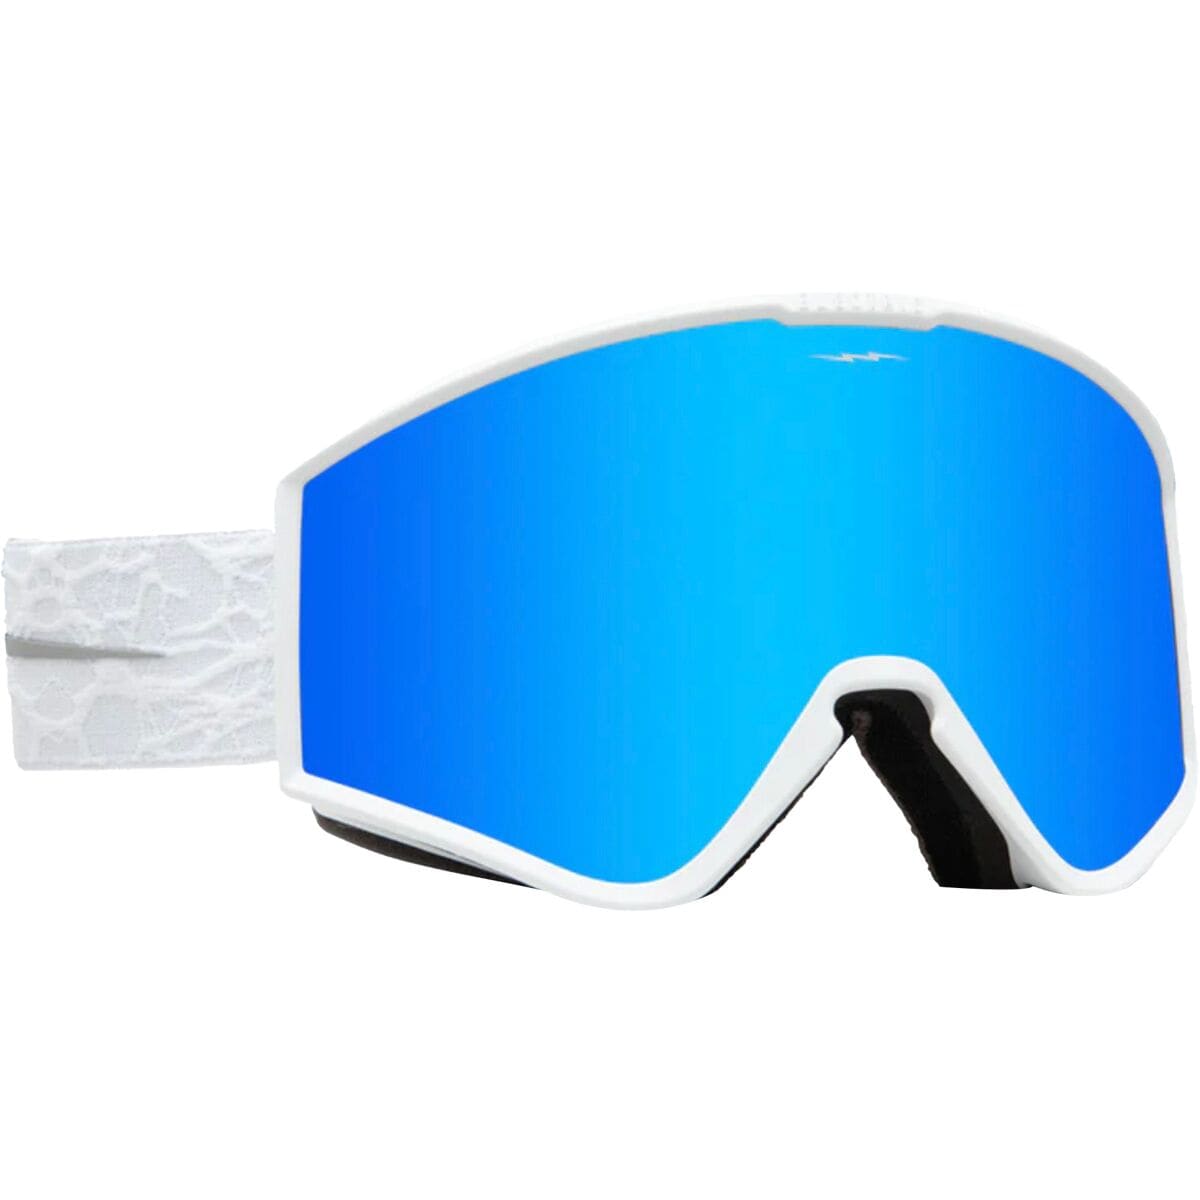 Electric Kleveland Small Goggles - Women's - Ski | Backcountry